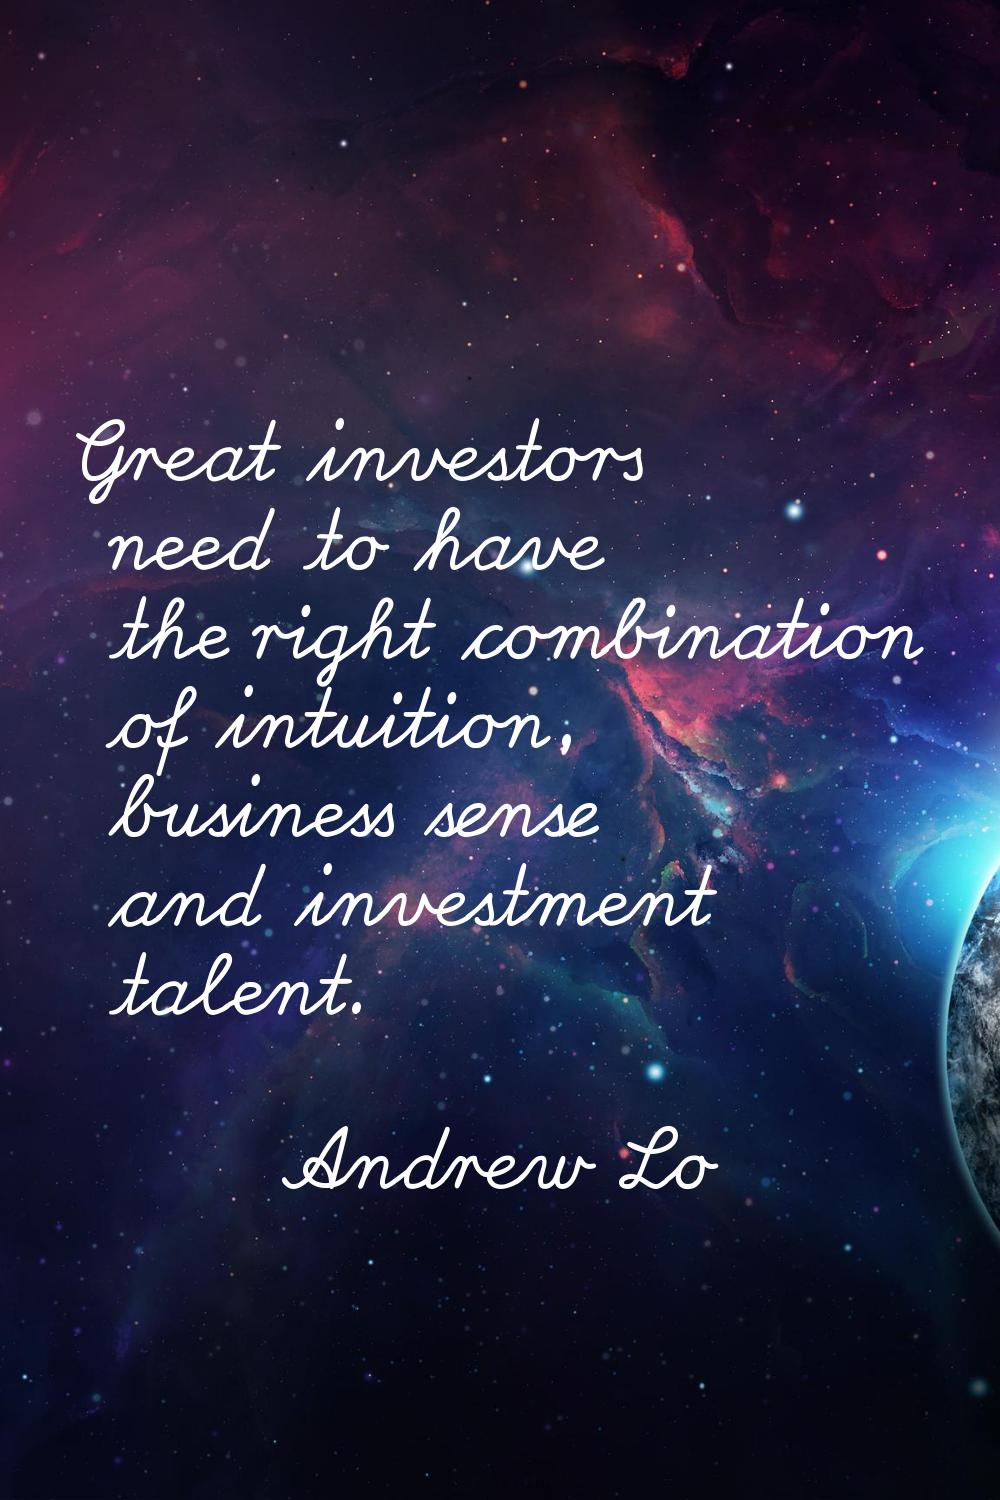 Great investors need to have the right combination of intuition, business sense and investment tale